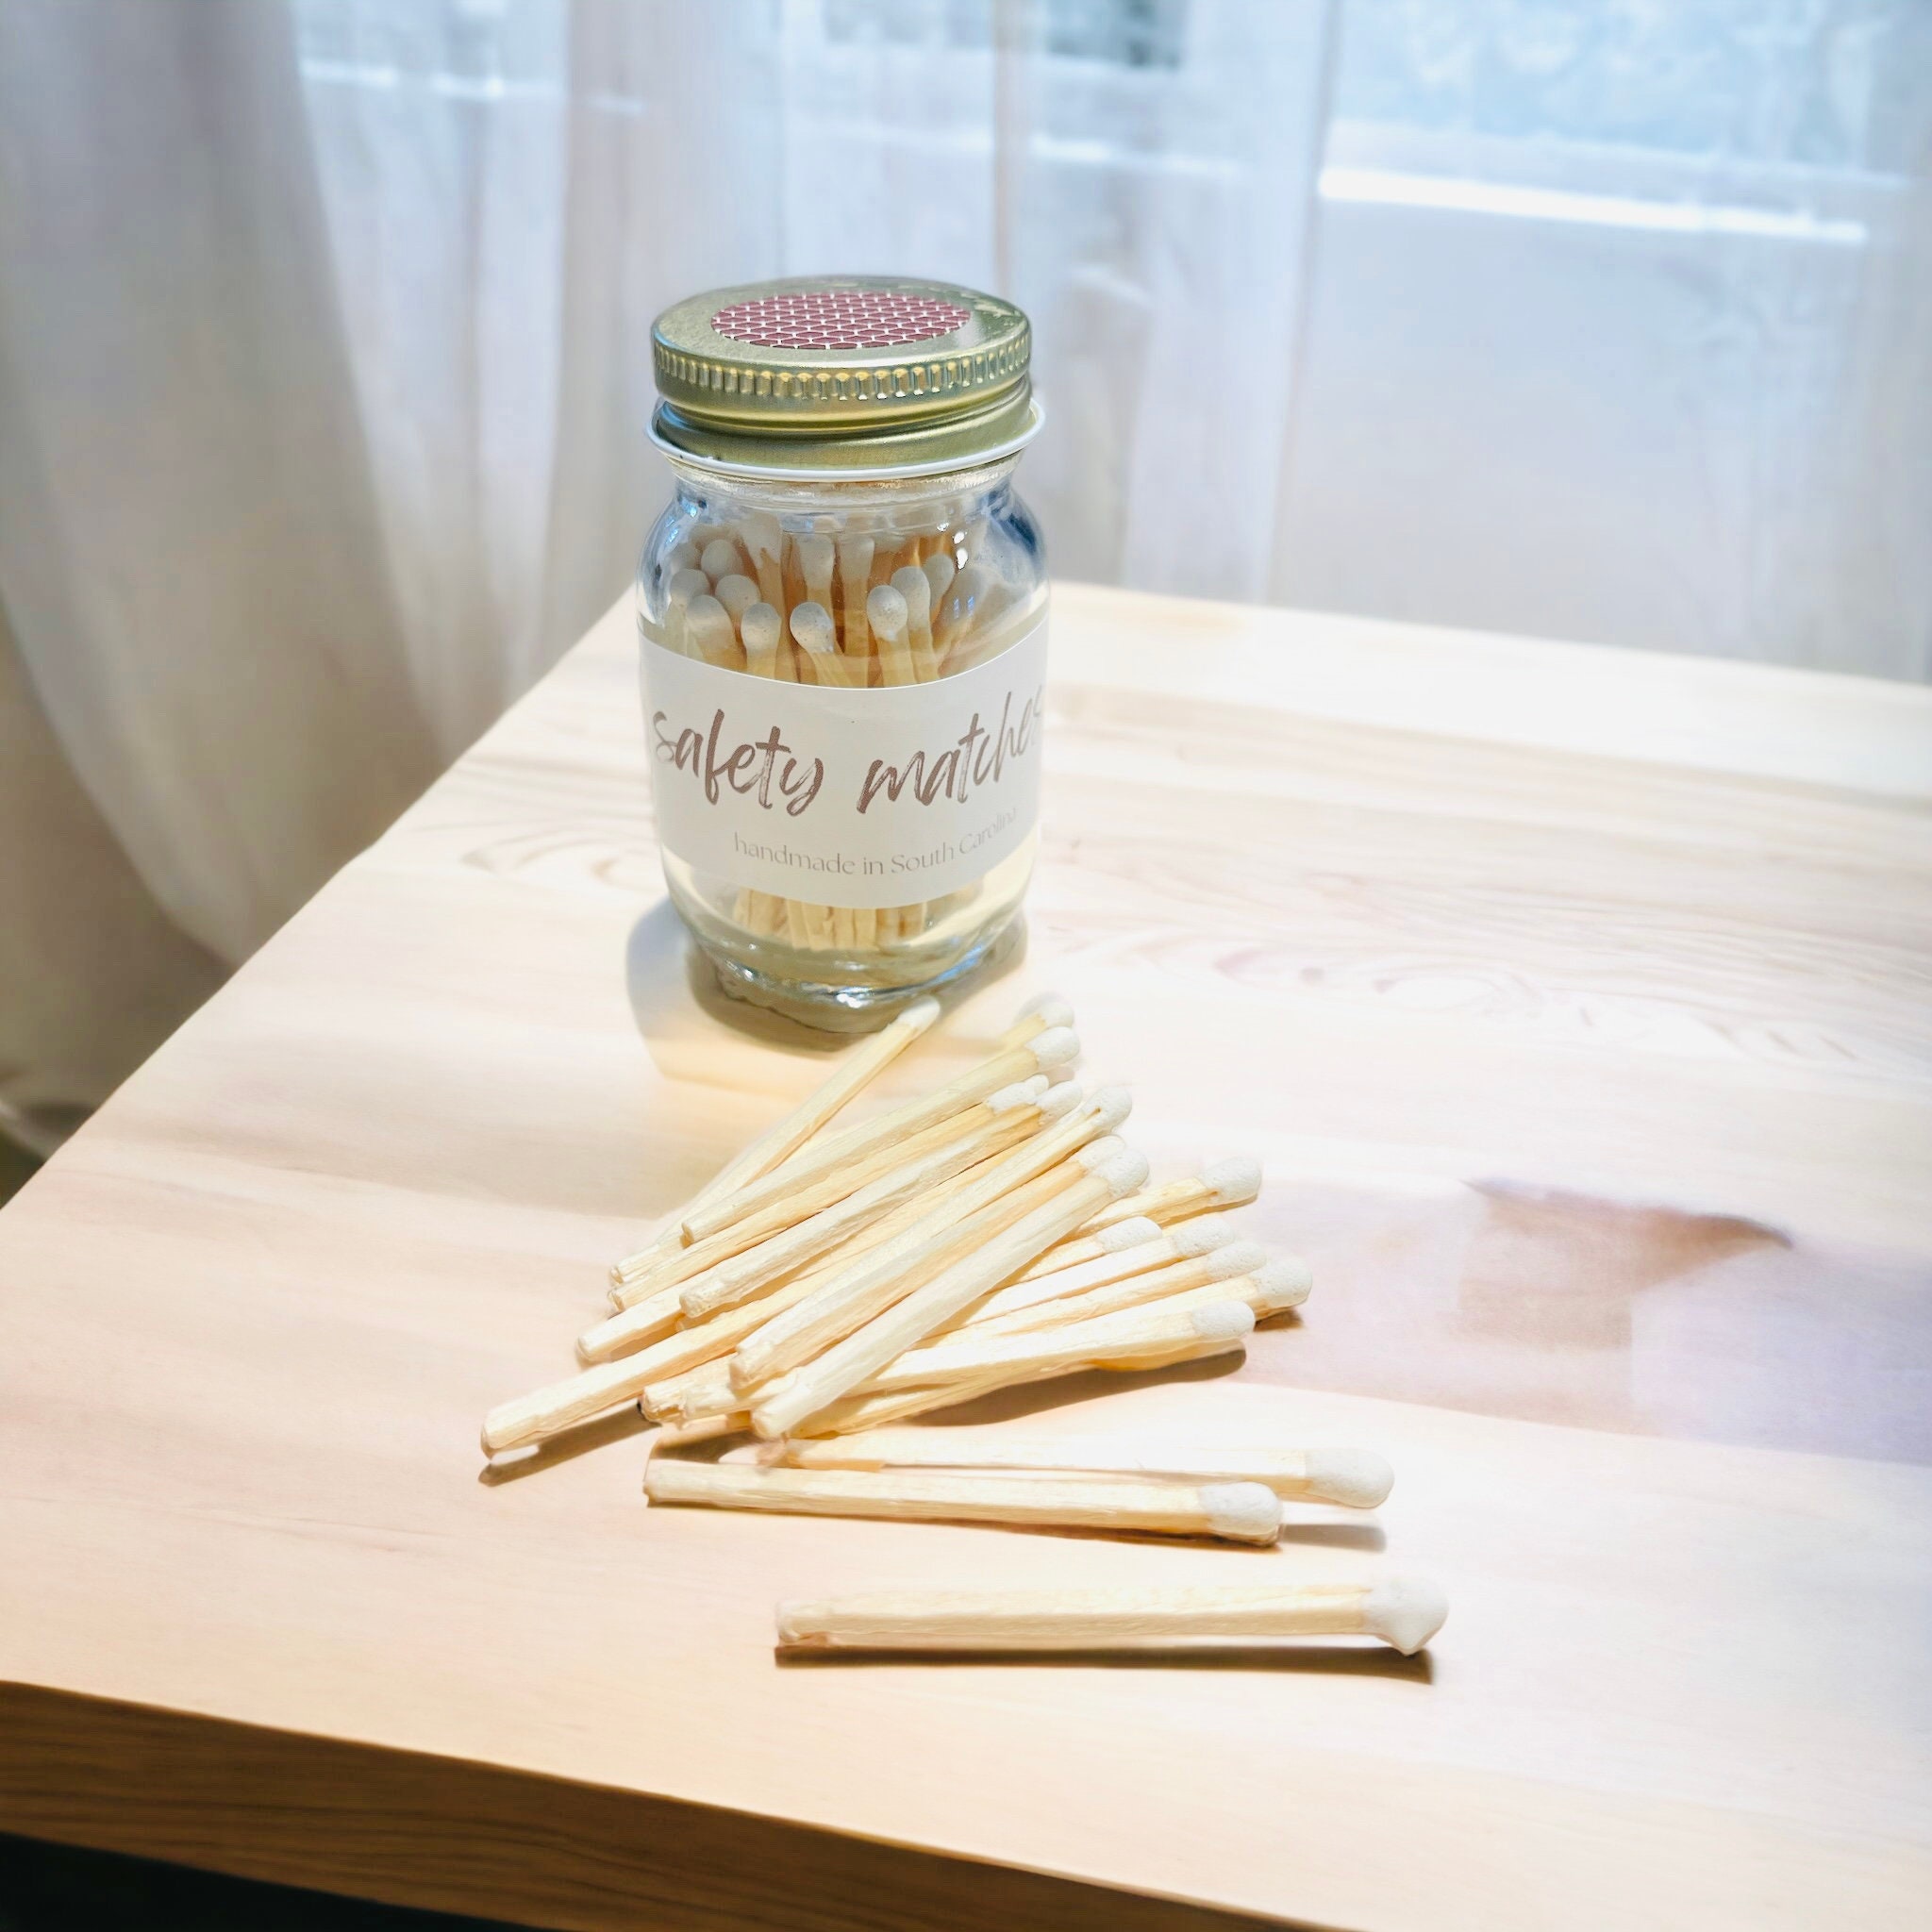 River Birch White Tip Decorative Matches | 200+ Small Premium Wooden Safety Matches | Replacement Refill Matchsticks | Home Decor